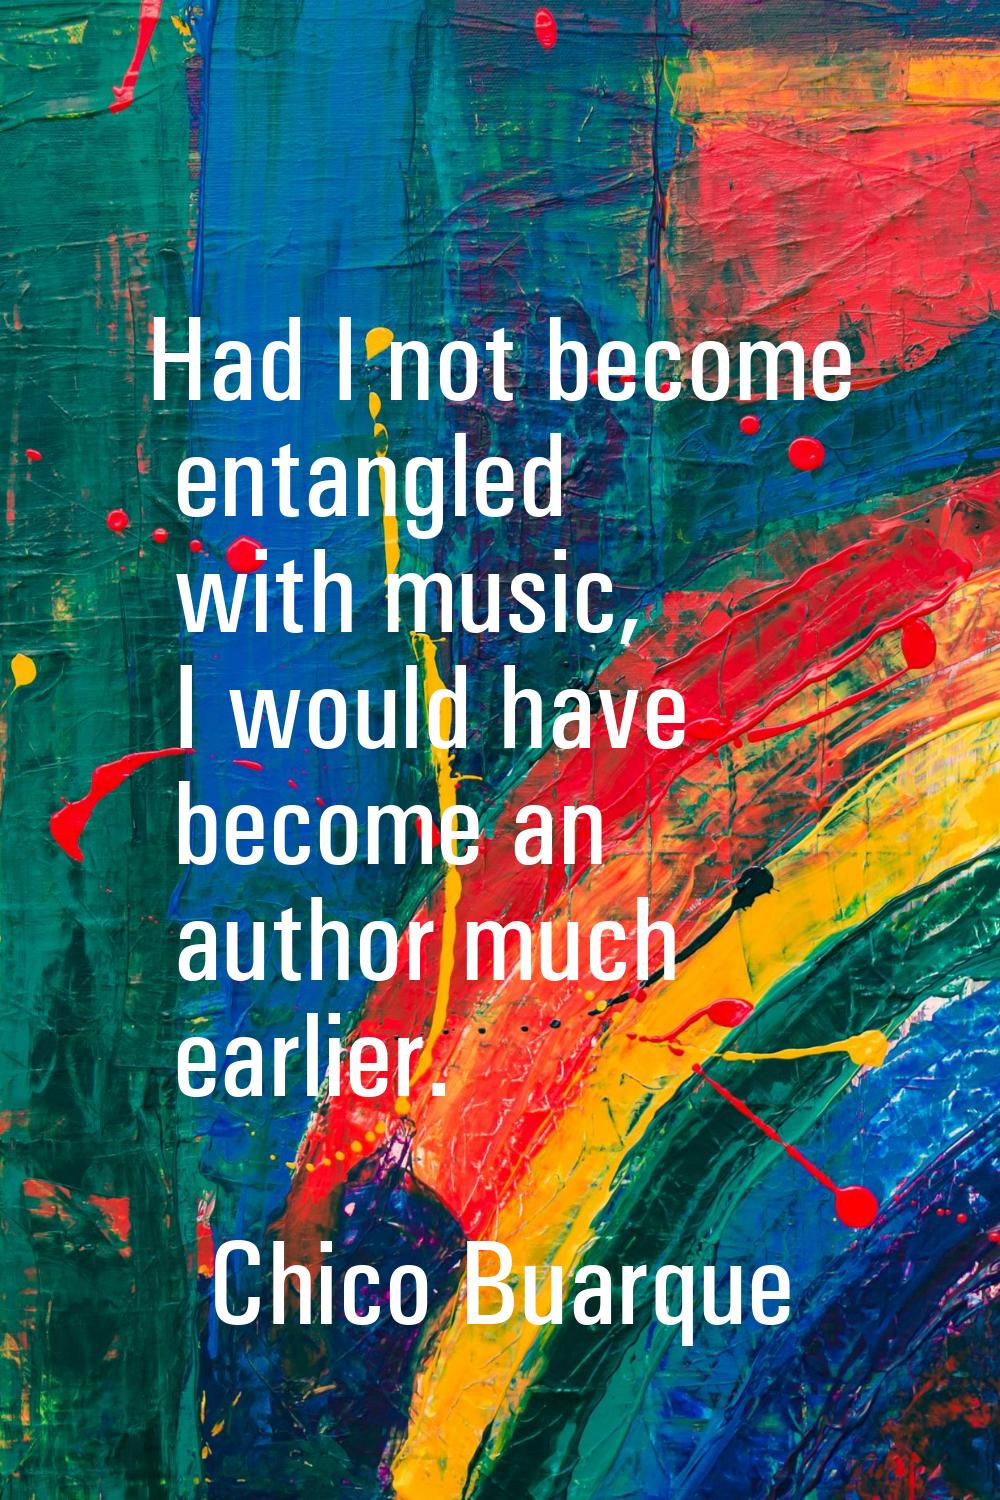 Had I not become entangled with music, I would have become an author much earlier.